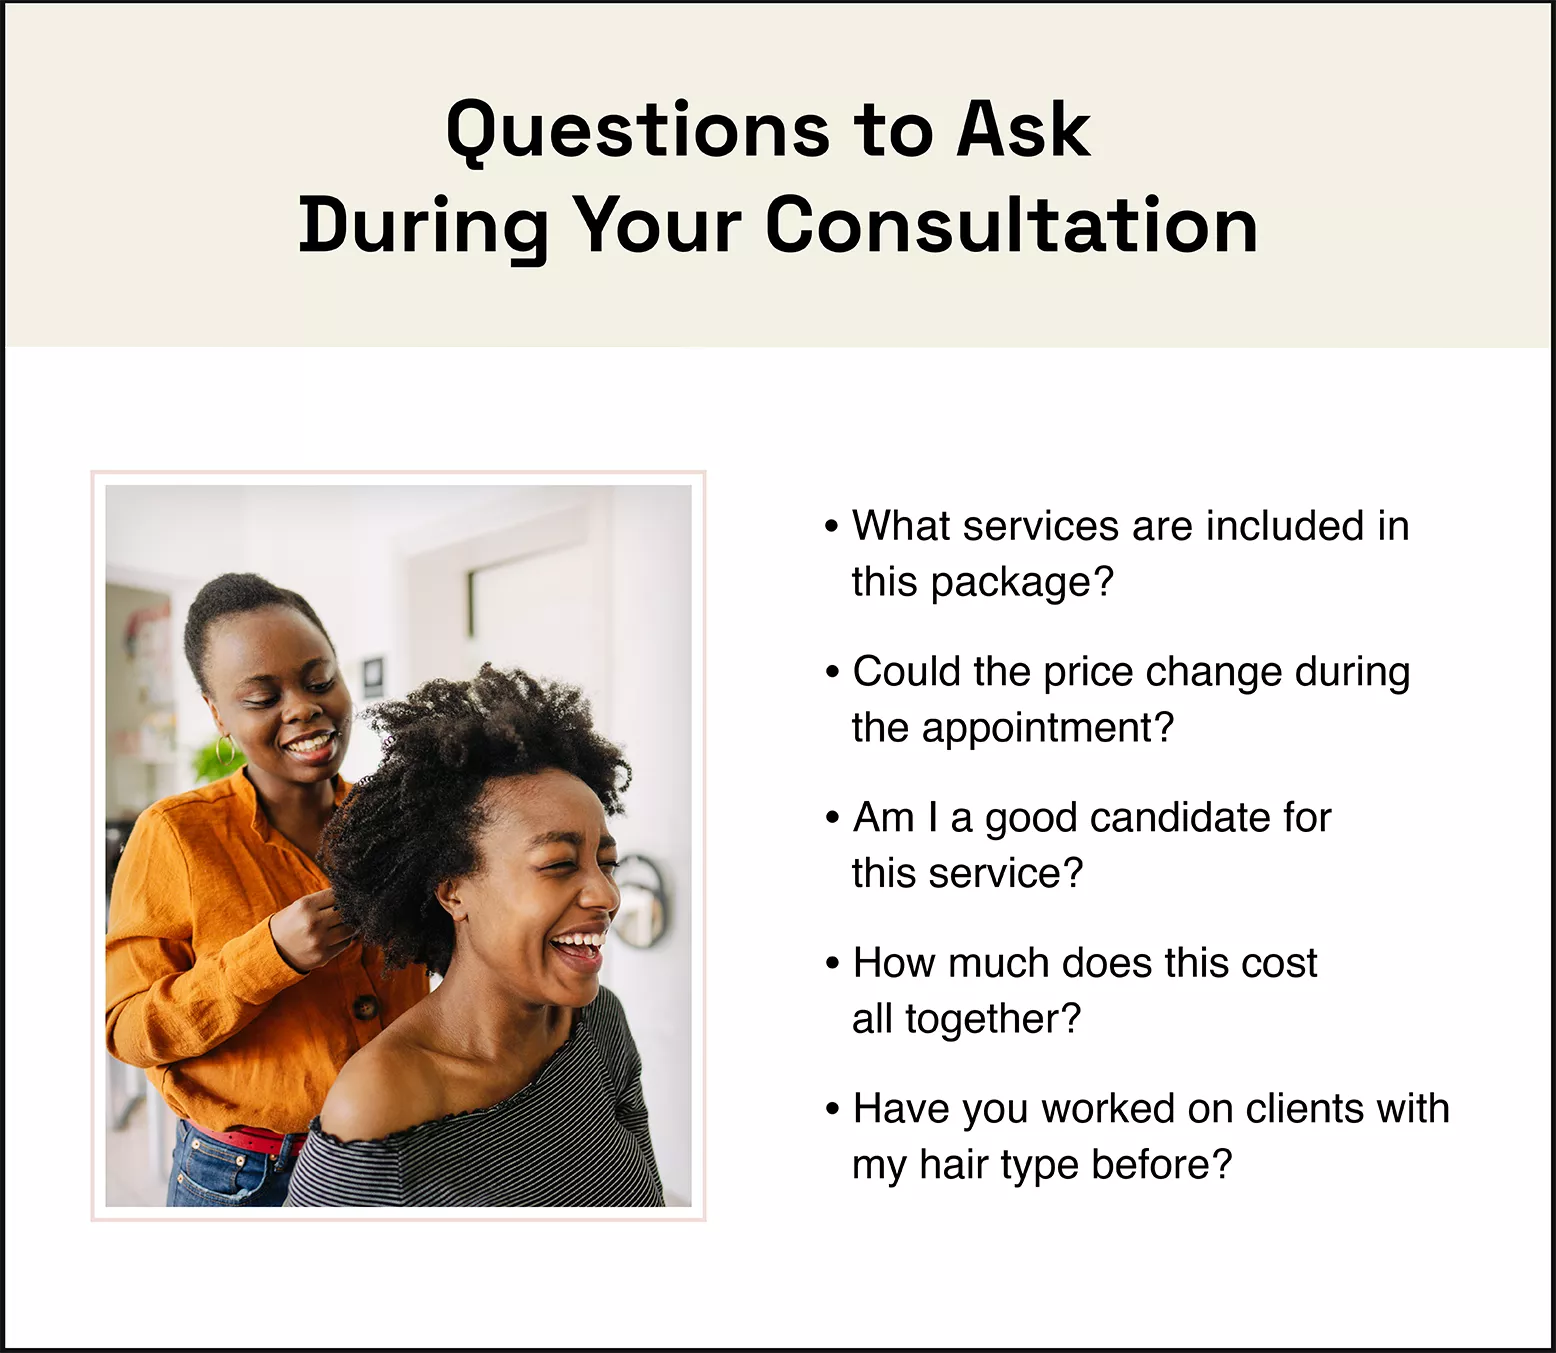 photo of stylist and client in the salon on the left, bulleted list of questions to ask during consultations on the right